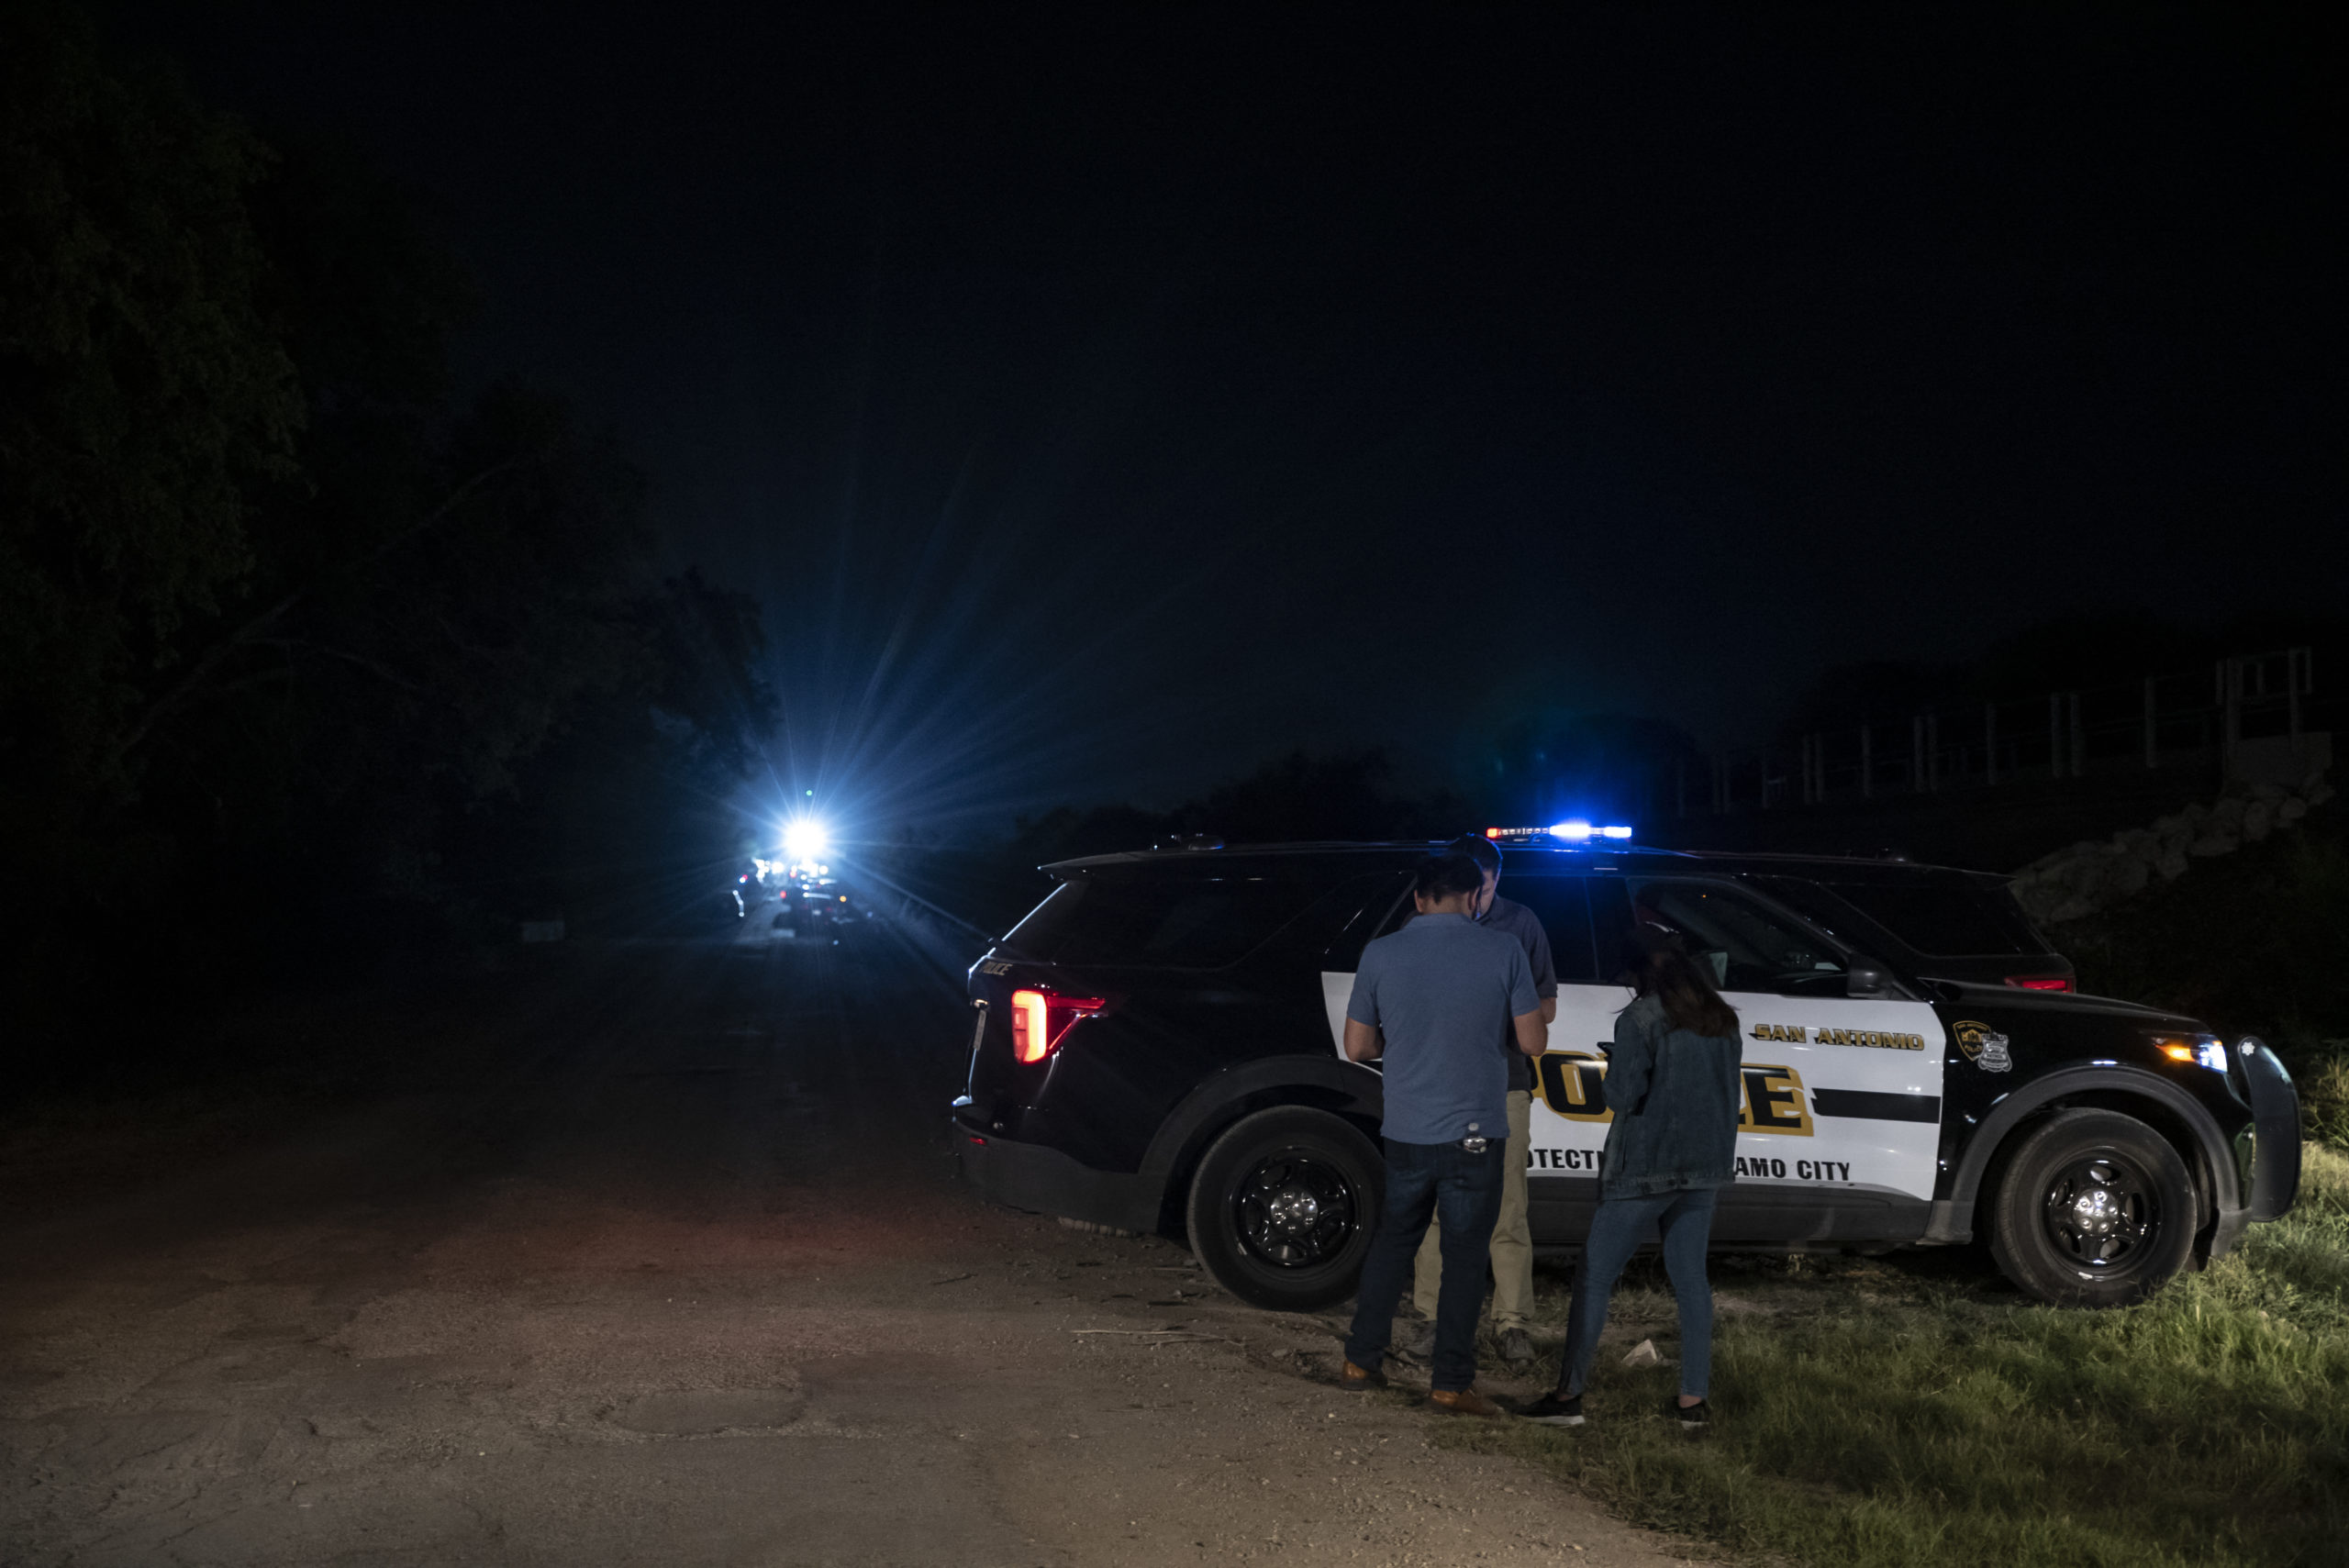 A police car is parked near the scene where a tractor-trailer was discovered with migrants inside outside San Antonio, Texas on June 27, 2022. At least 46 migrants were found dead June 27, 2022 in and around a tractor-trailer that was abandoned on the roadside on the outskirts of the Texas city of San Antonio. (Photo by SERGIO FLORES/AFP via Getty Images)